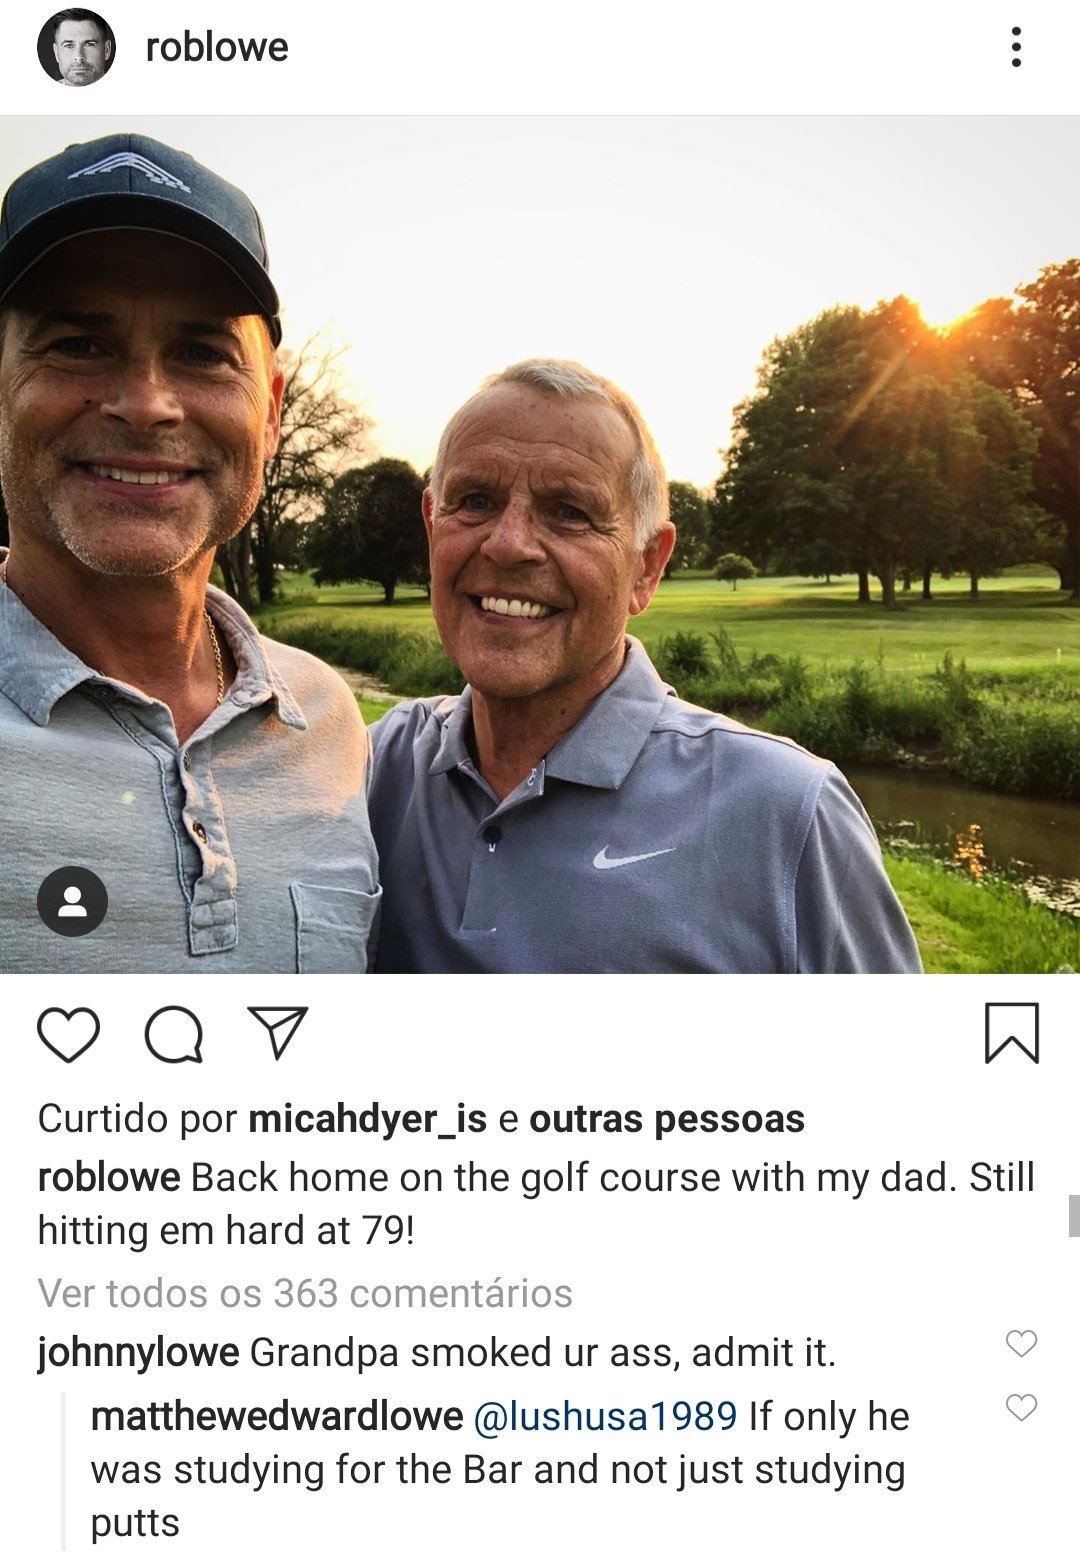 senior citizen - roblowe o o Curtido por micahdyer_is e outras pessoas roblowe Back home on the golf course with my dad. Still hitting em hard at 79! Ver todos os 363 comentrios johnnylowe Grandpa smoked ur ass, admit it. matthewedwardlowe If only he was